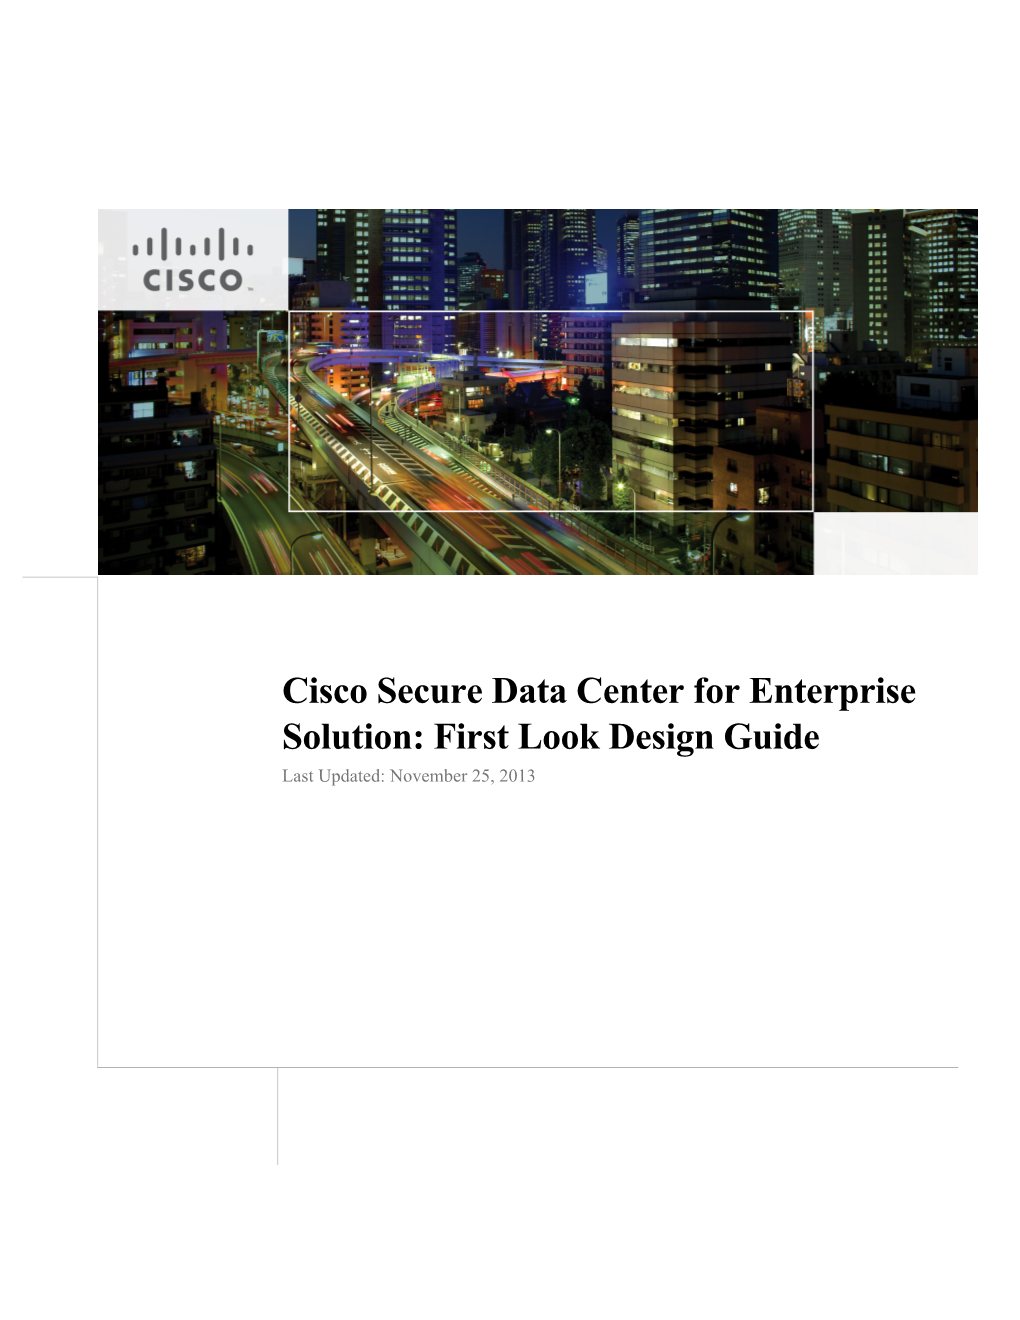 Cisco Secure Data Center for Enterprise Solution: First Look Design Guide Last Updated: November 25, 2013 2 About the Authors